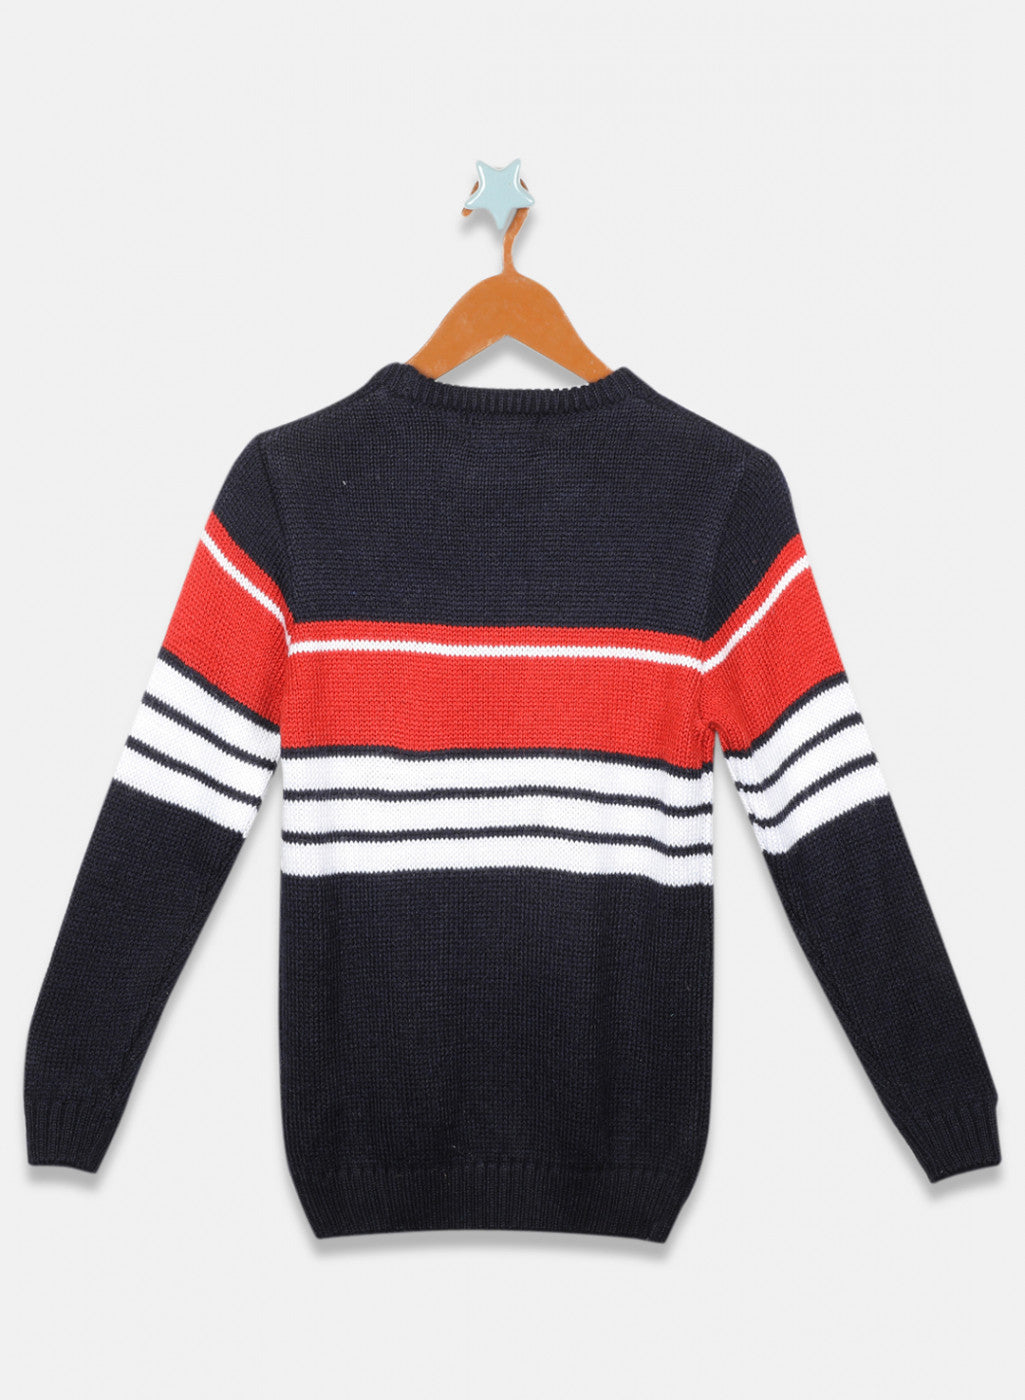 Oswal NAvy Multi Color Boys Pullover